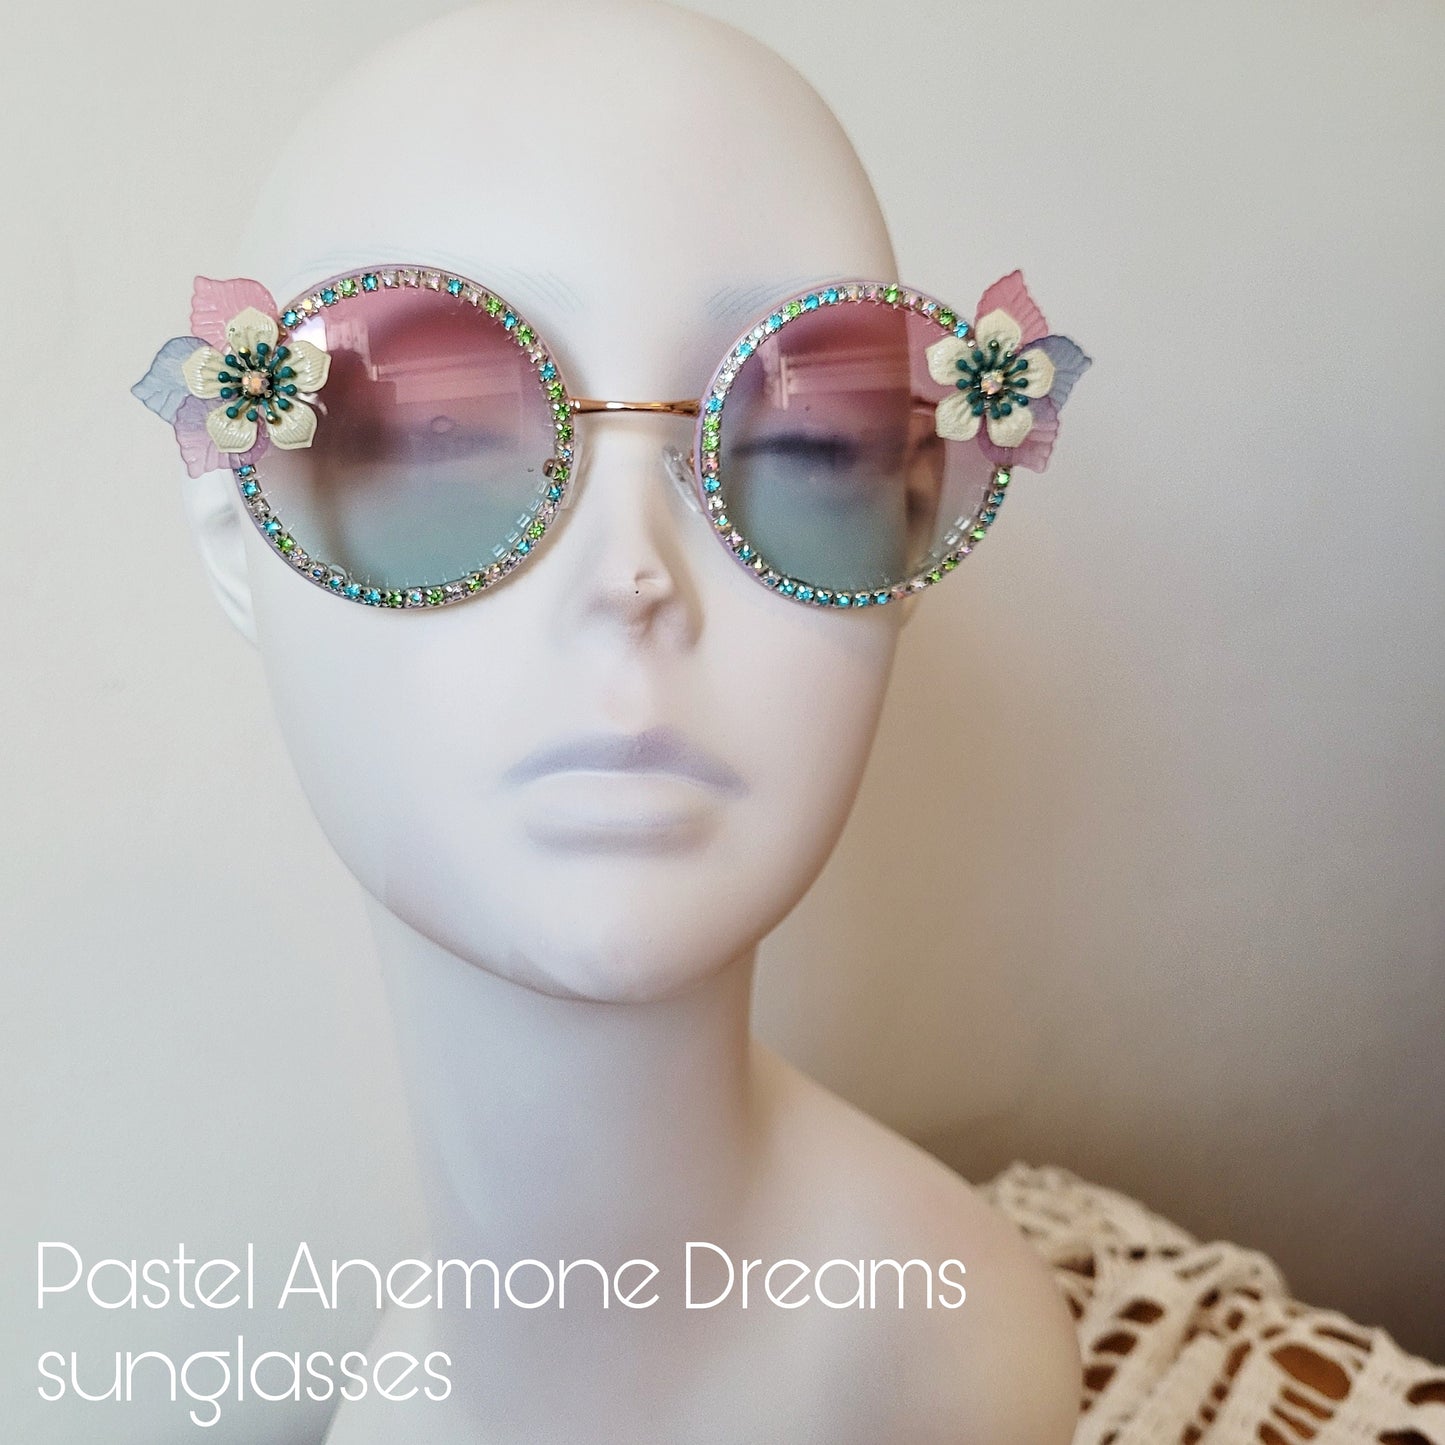 Bumblebee Dreams collection: the Pastel Anemone Dreams Sunglasses